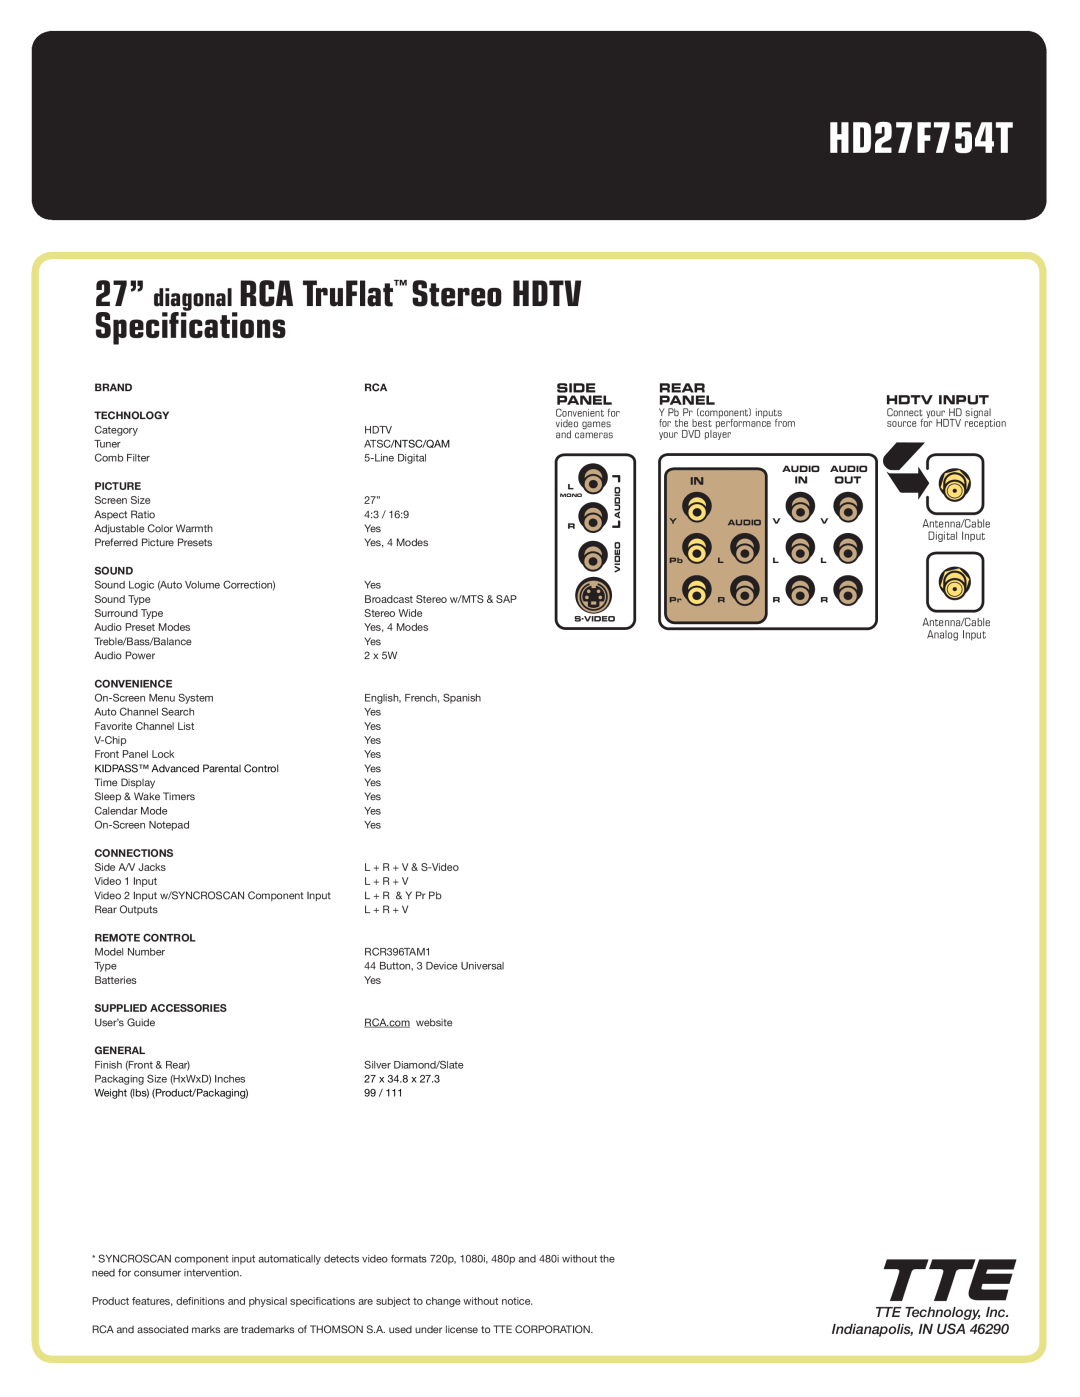 RCA HD27F754T 27” diagonal RCA TruFlat Stereo HDTV Specifications, TTE Technology, Inc. Indianapolis, IN USA, Side Panel 